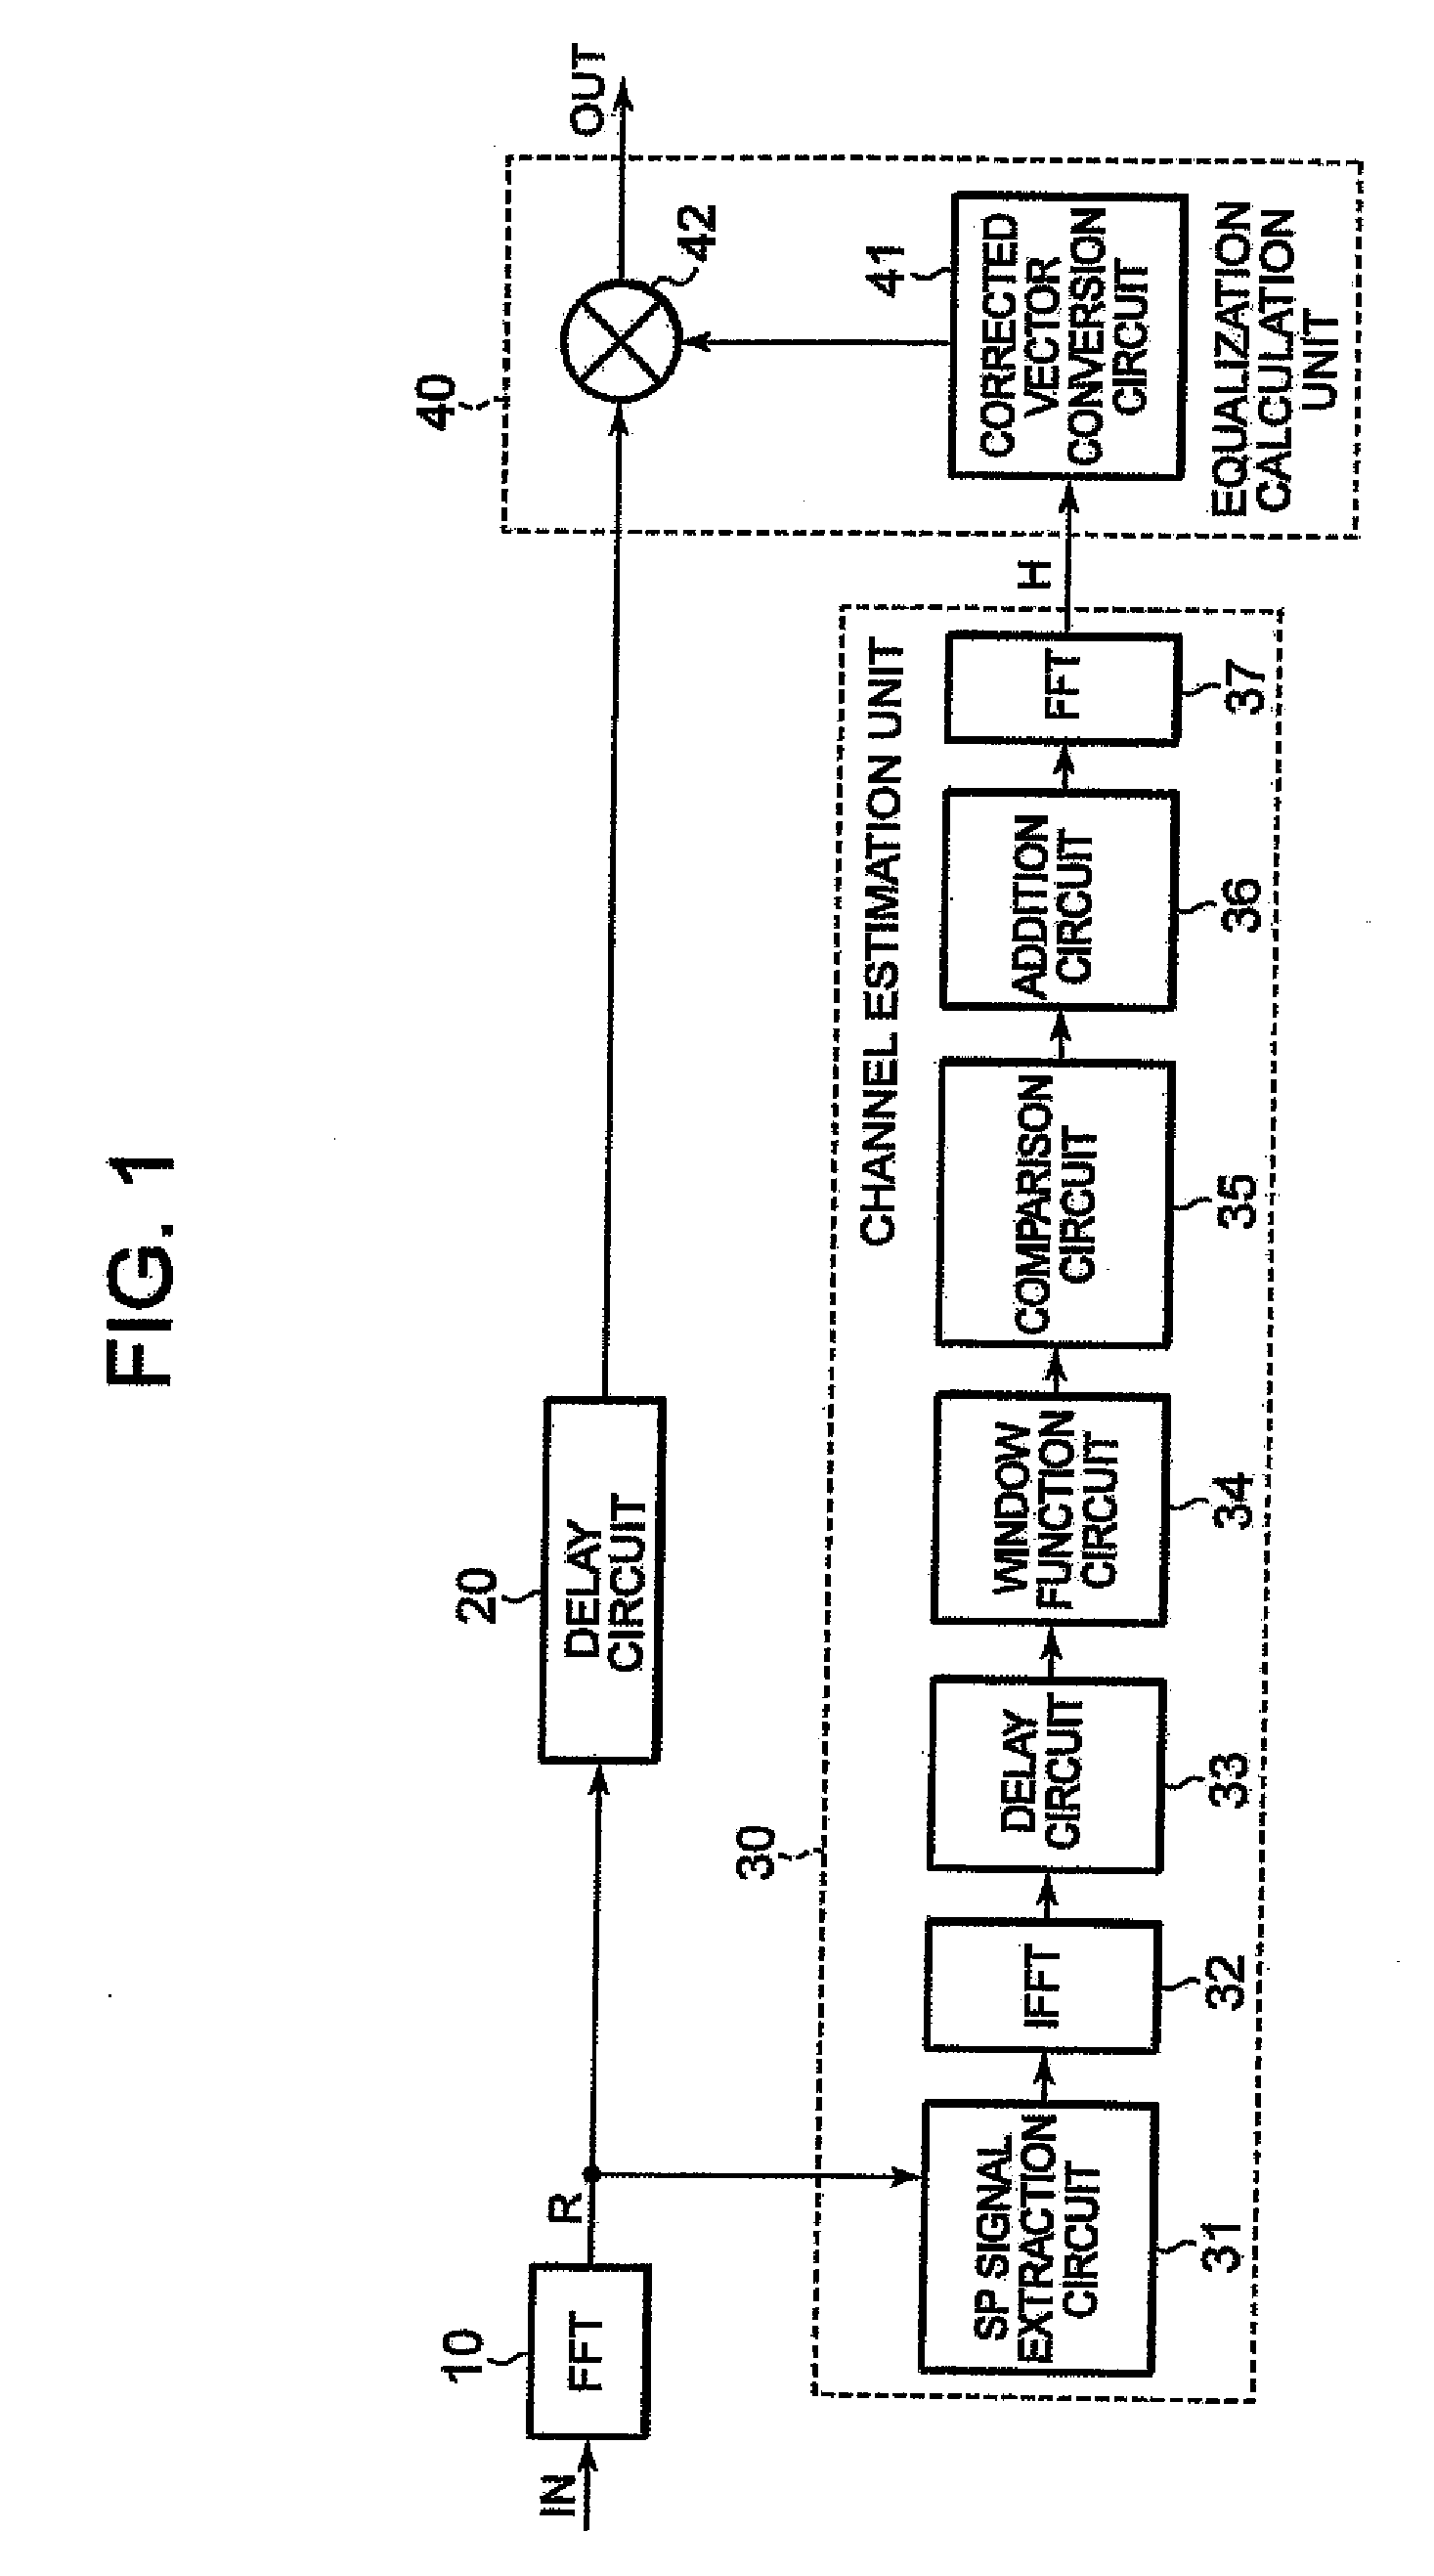 Orthogonal frequency division multiplex (OFDM) signal equalizier